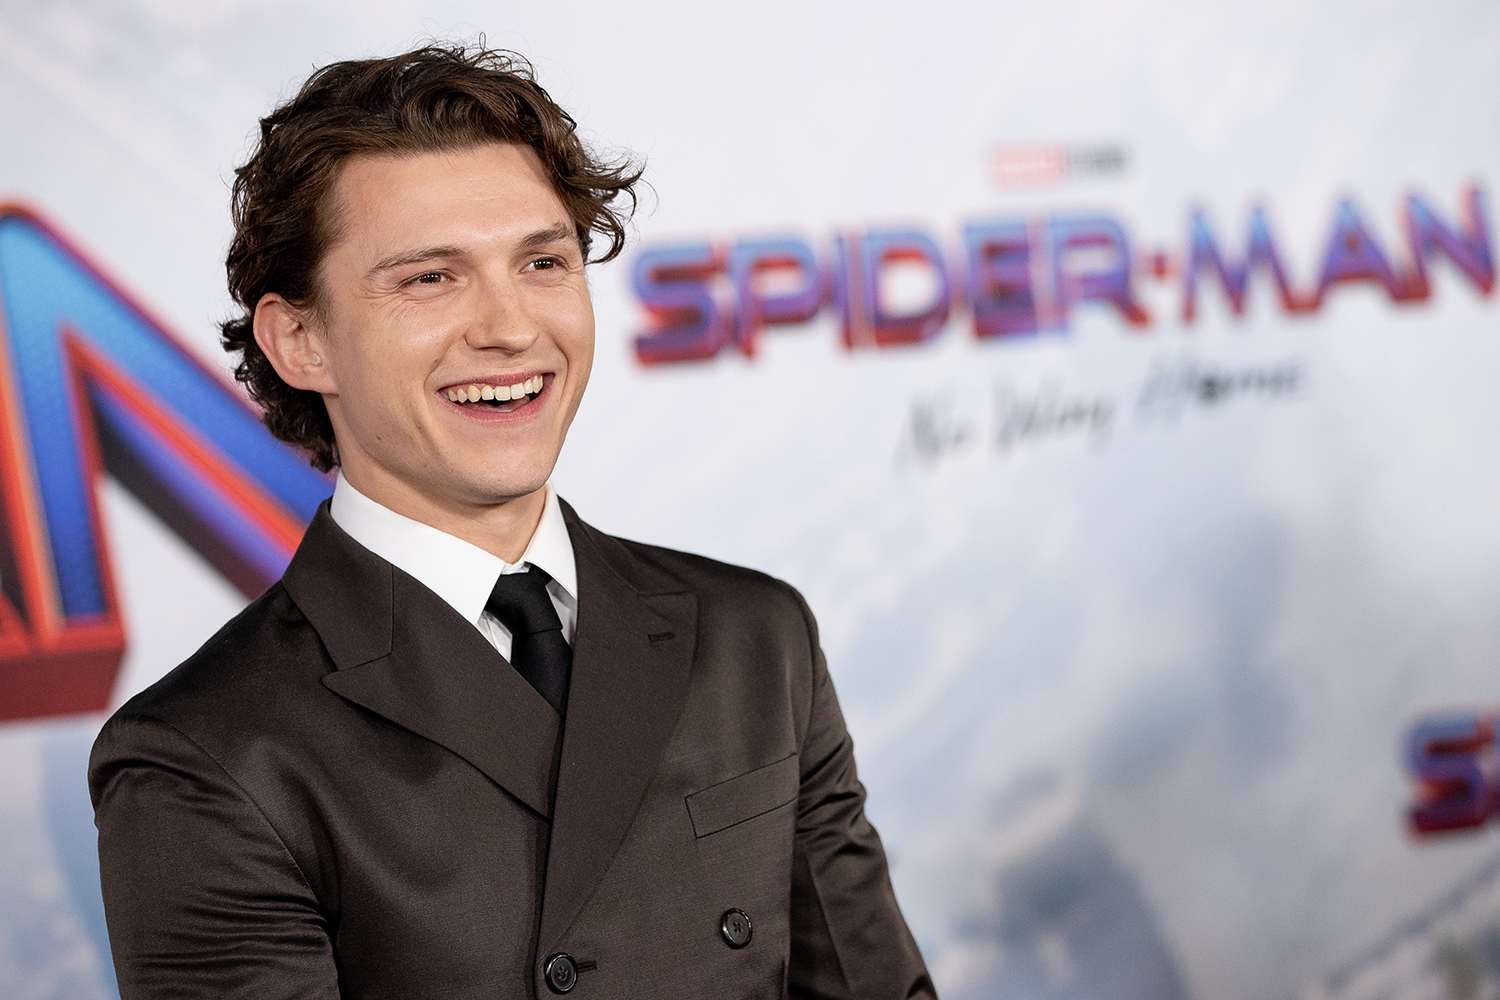 Tom Holland attends the premiere of Spider-Man: No Way Home